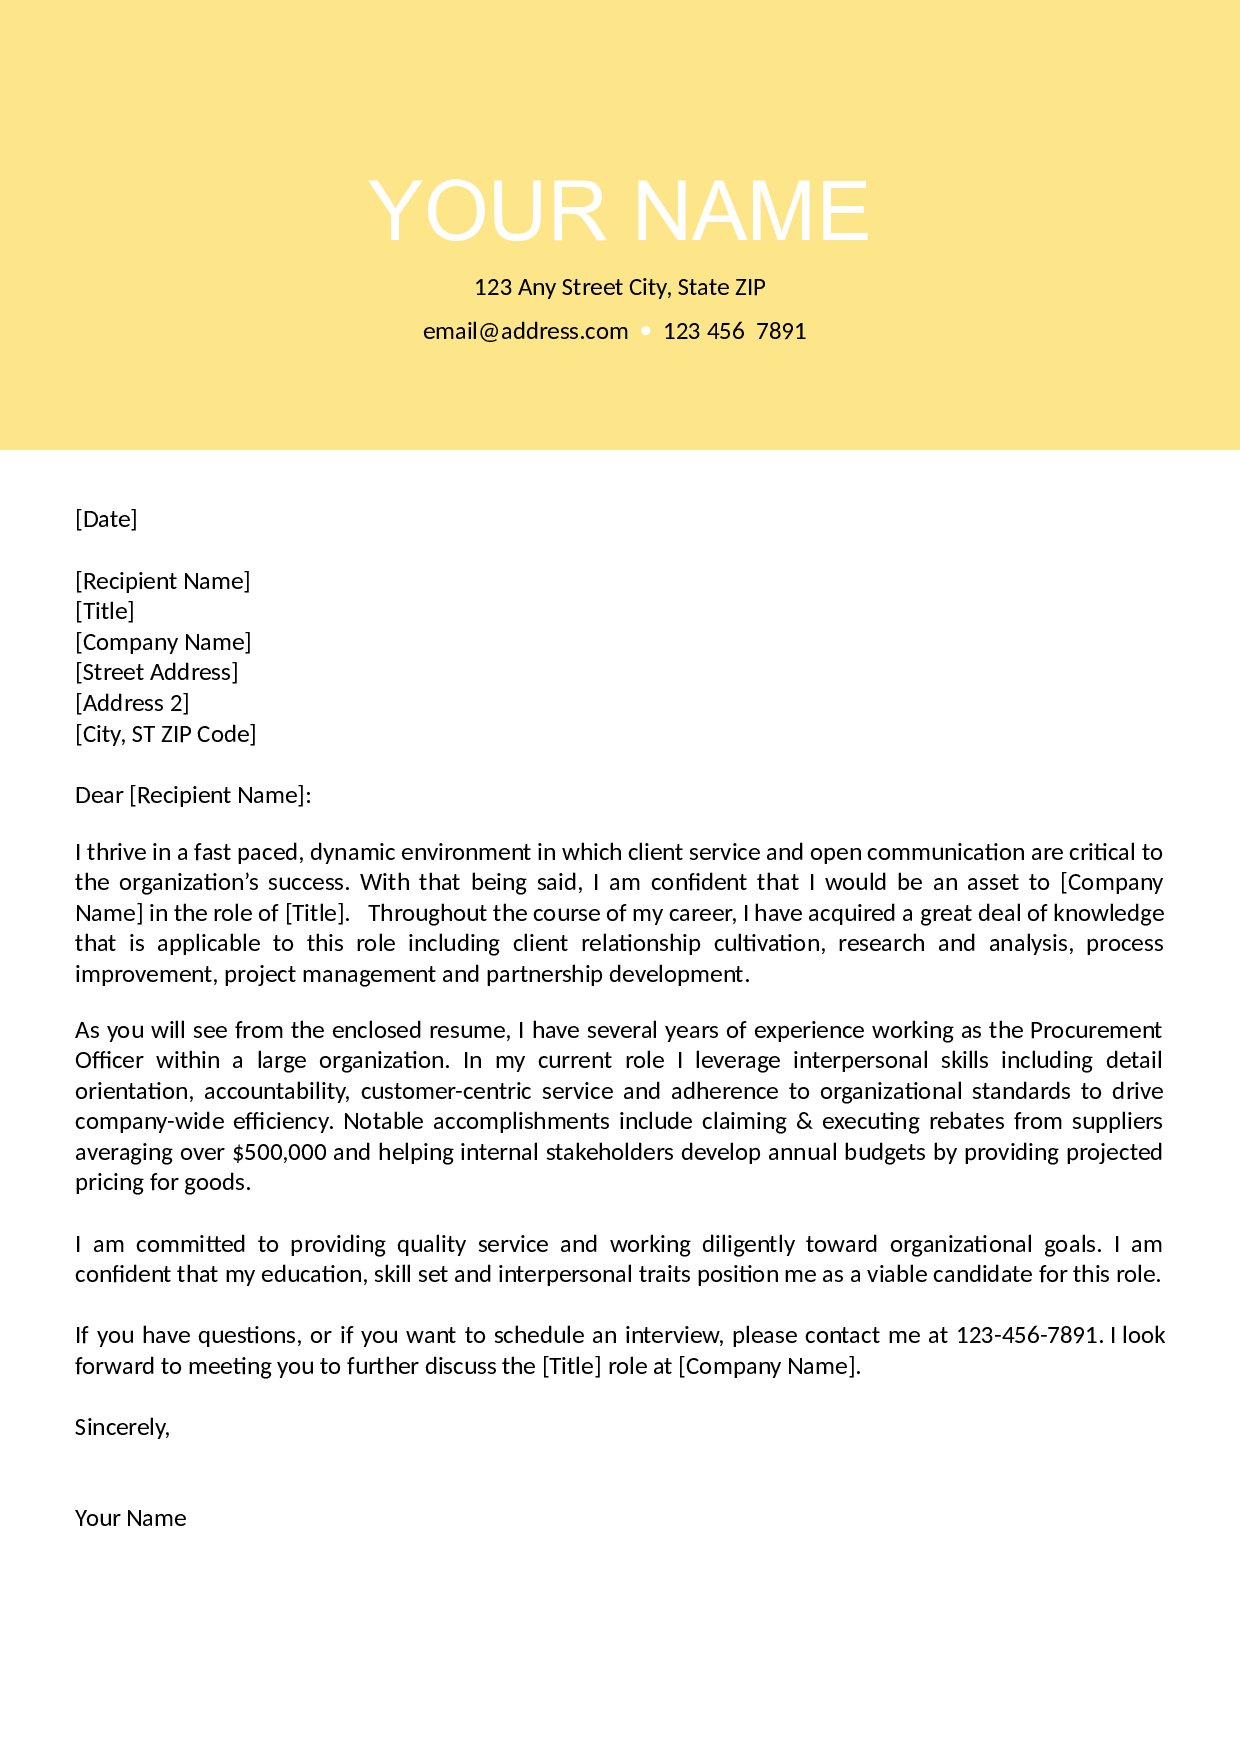 Buyer Cover Letter (1240 x 1754 Pixel)